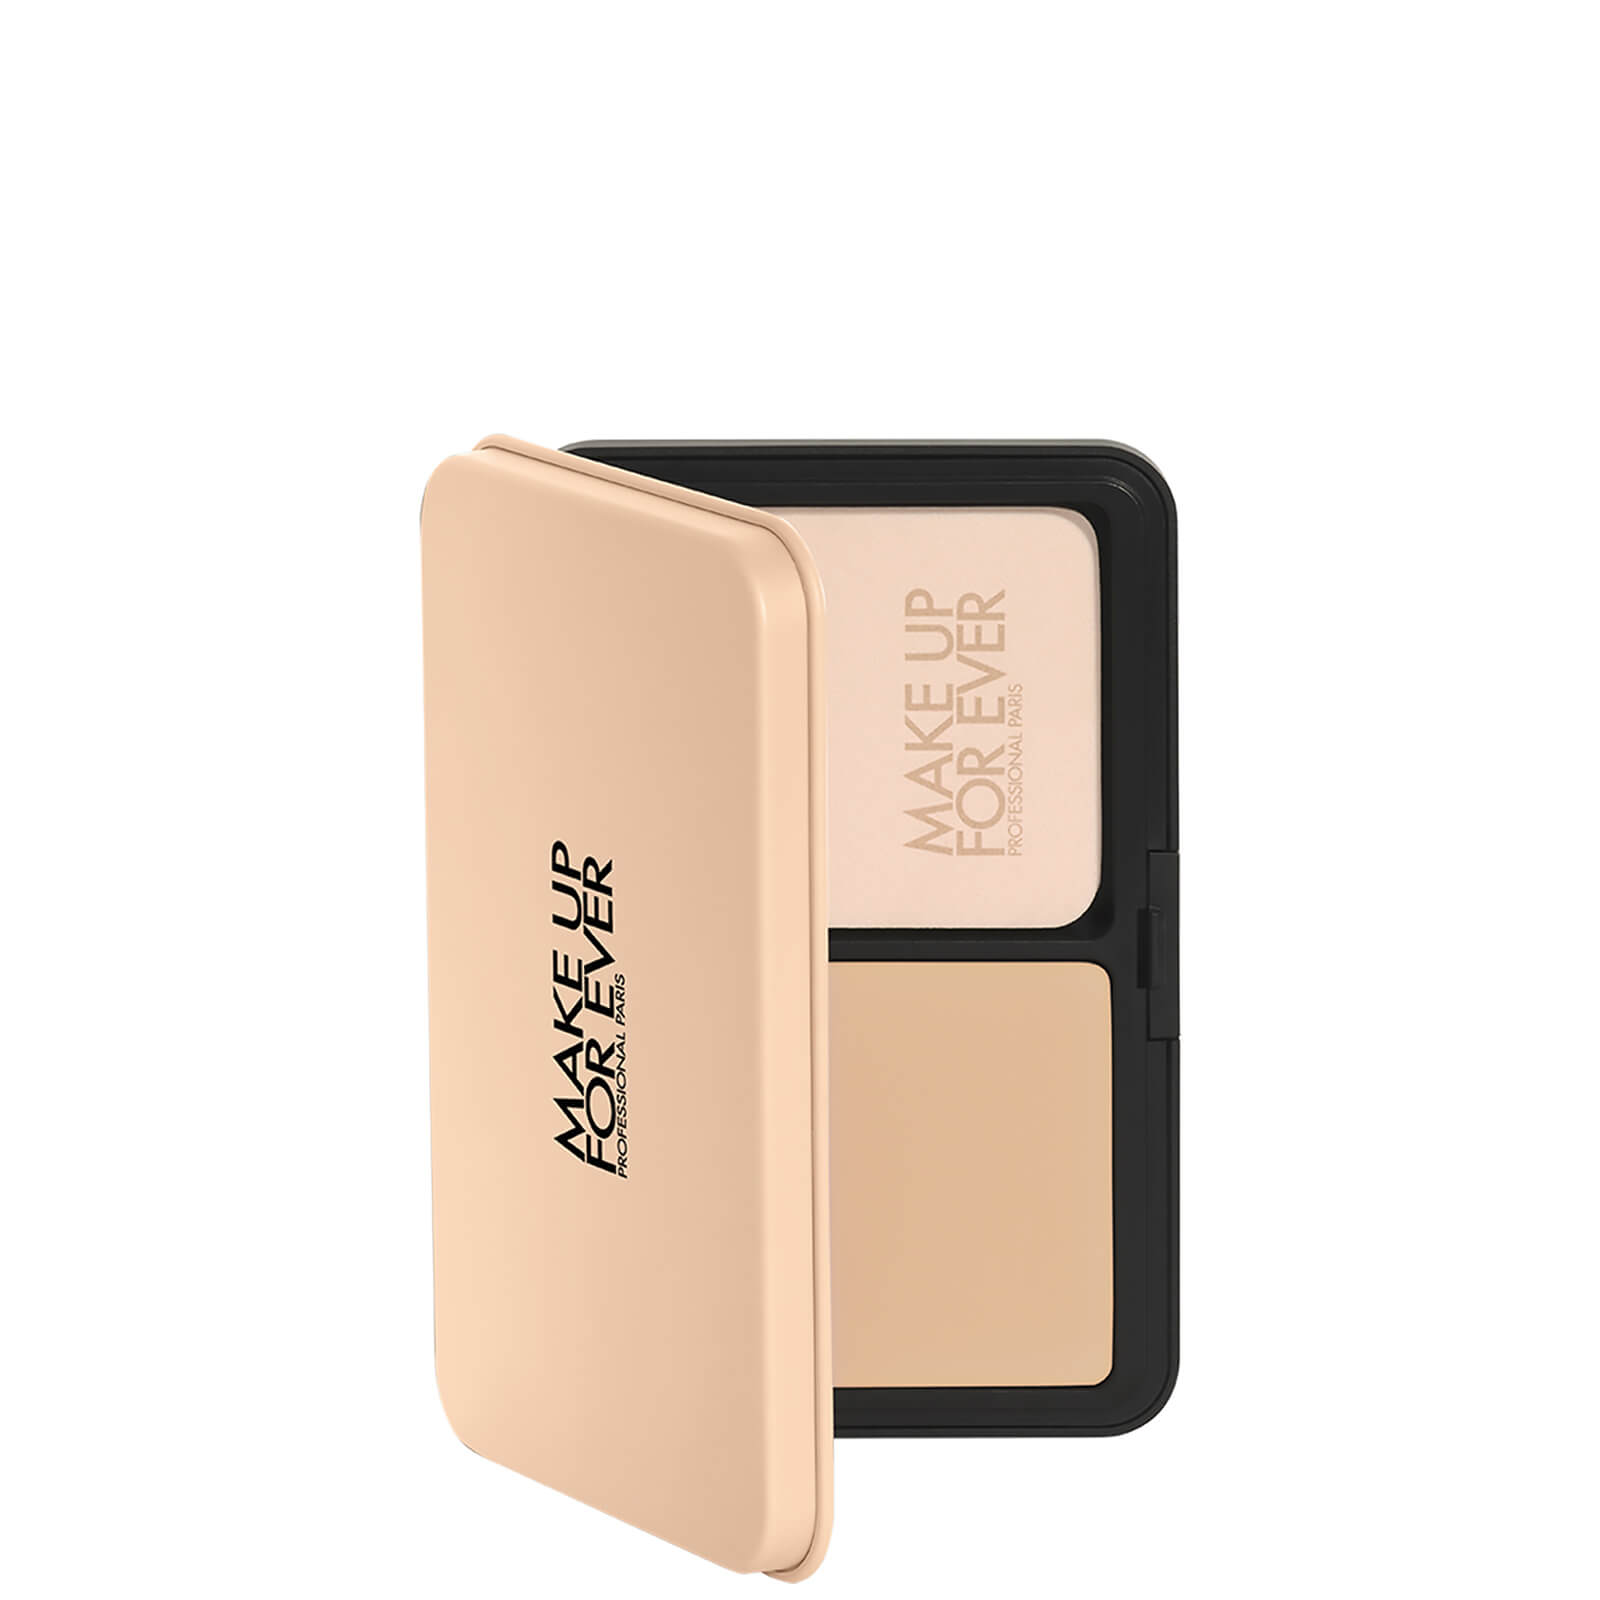 MAKE UP FOR EVER HD SKIN Powder Foundation 11g (Various Shades) - 1Y08